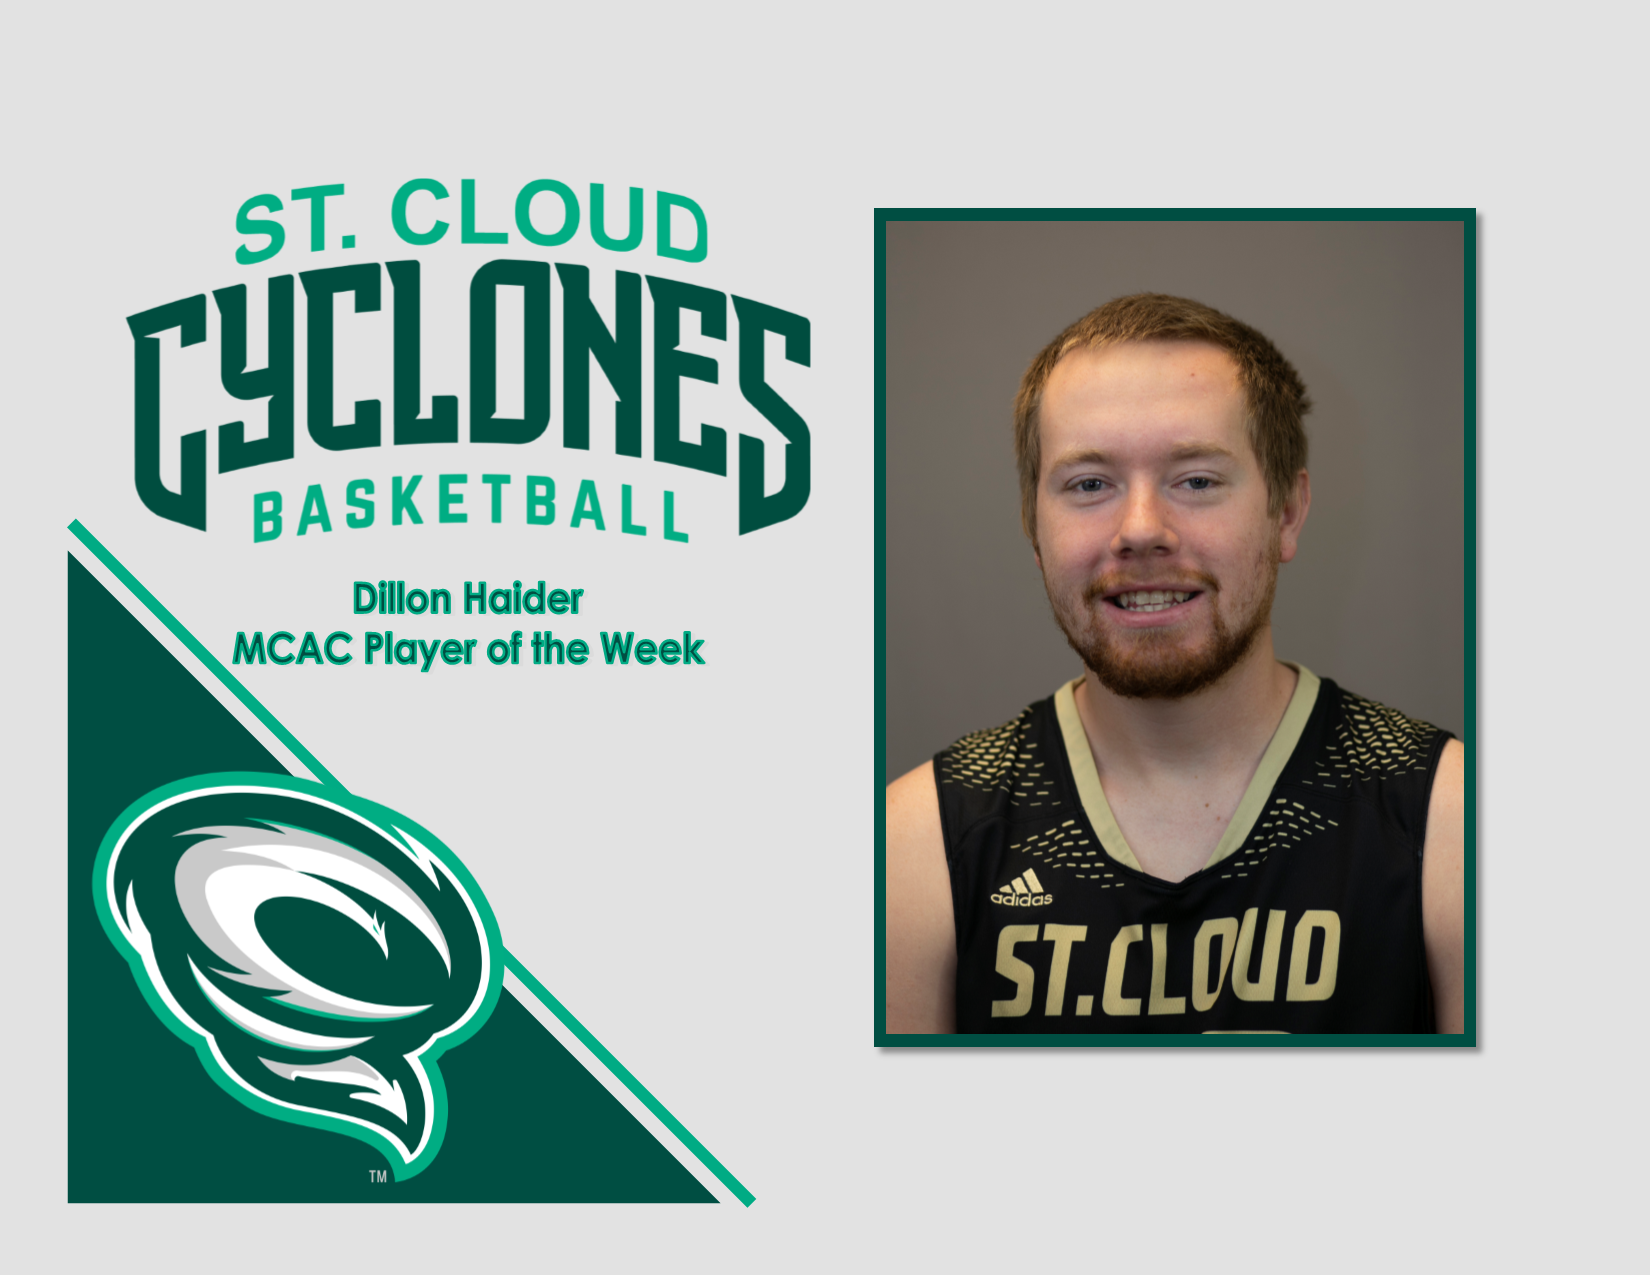 Cyclones Freshman Dillon Haider Named MCAC Player of the Week